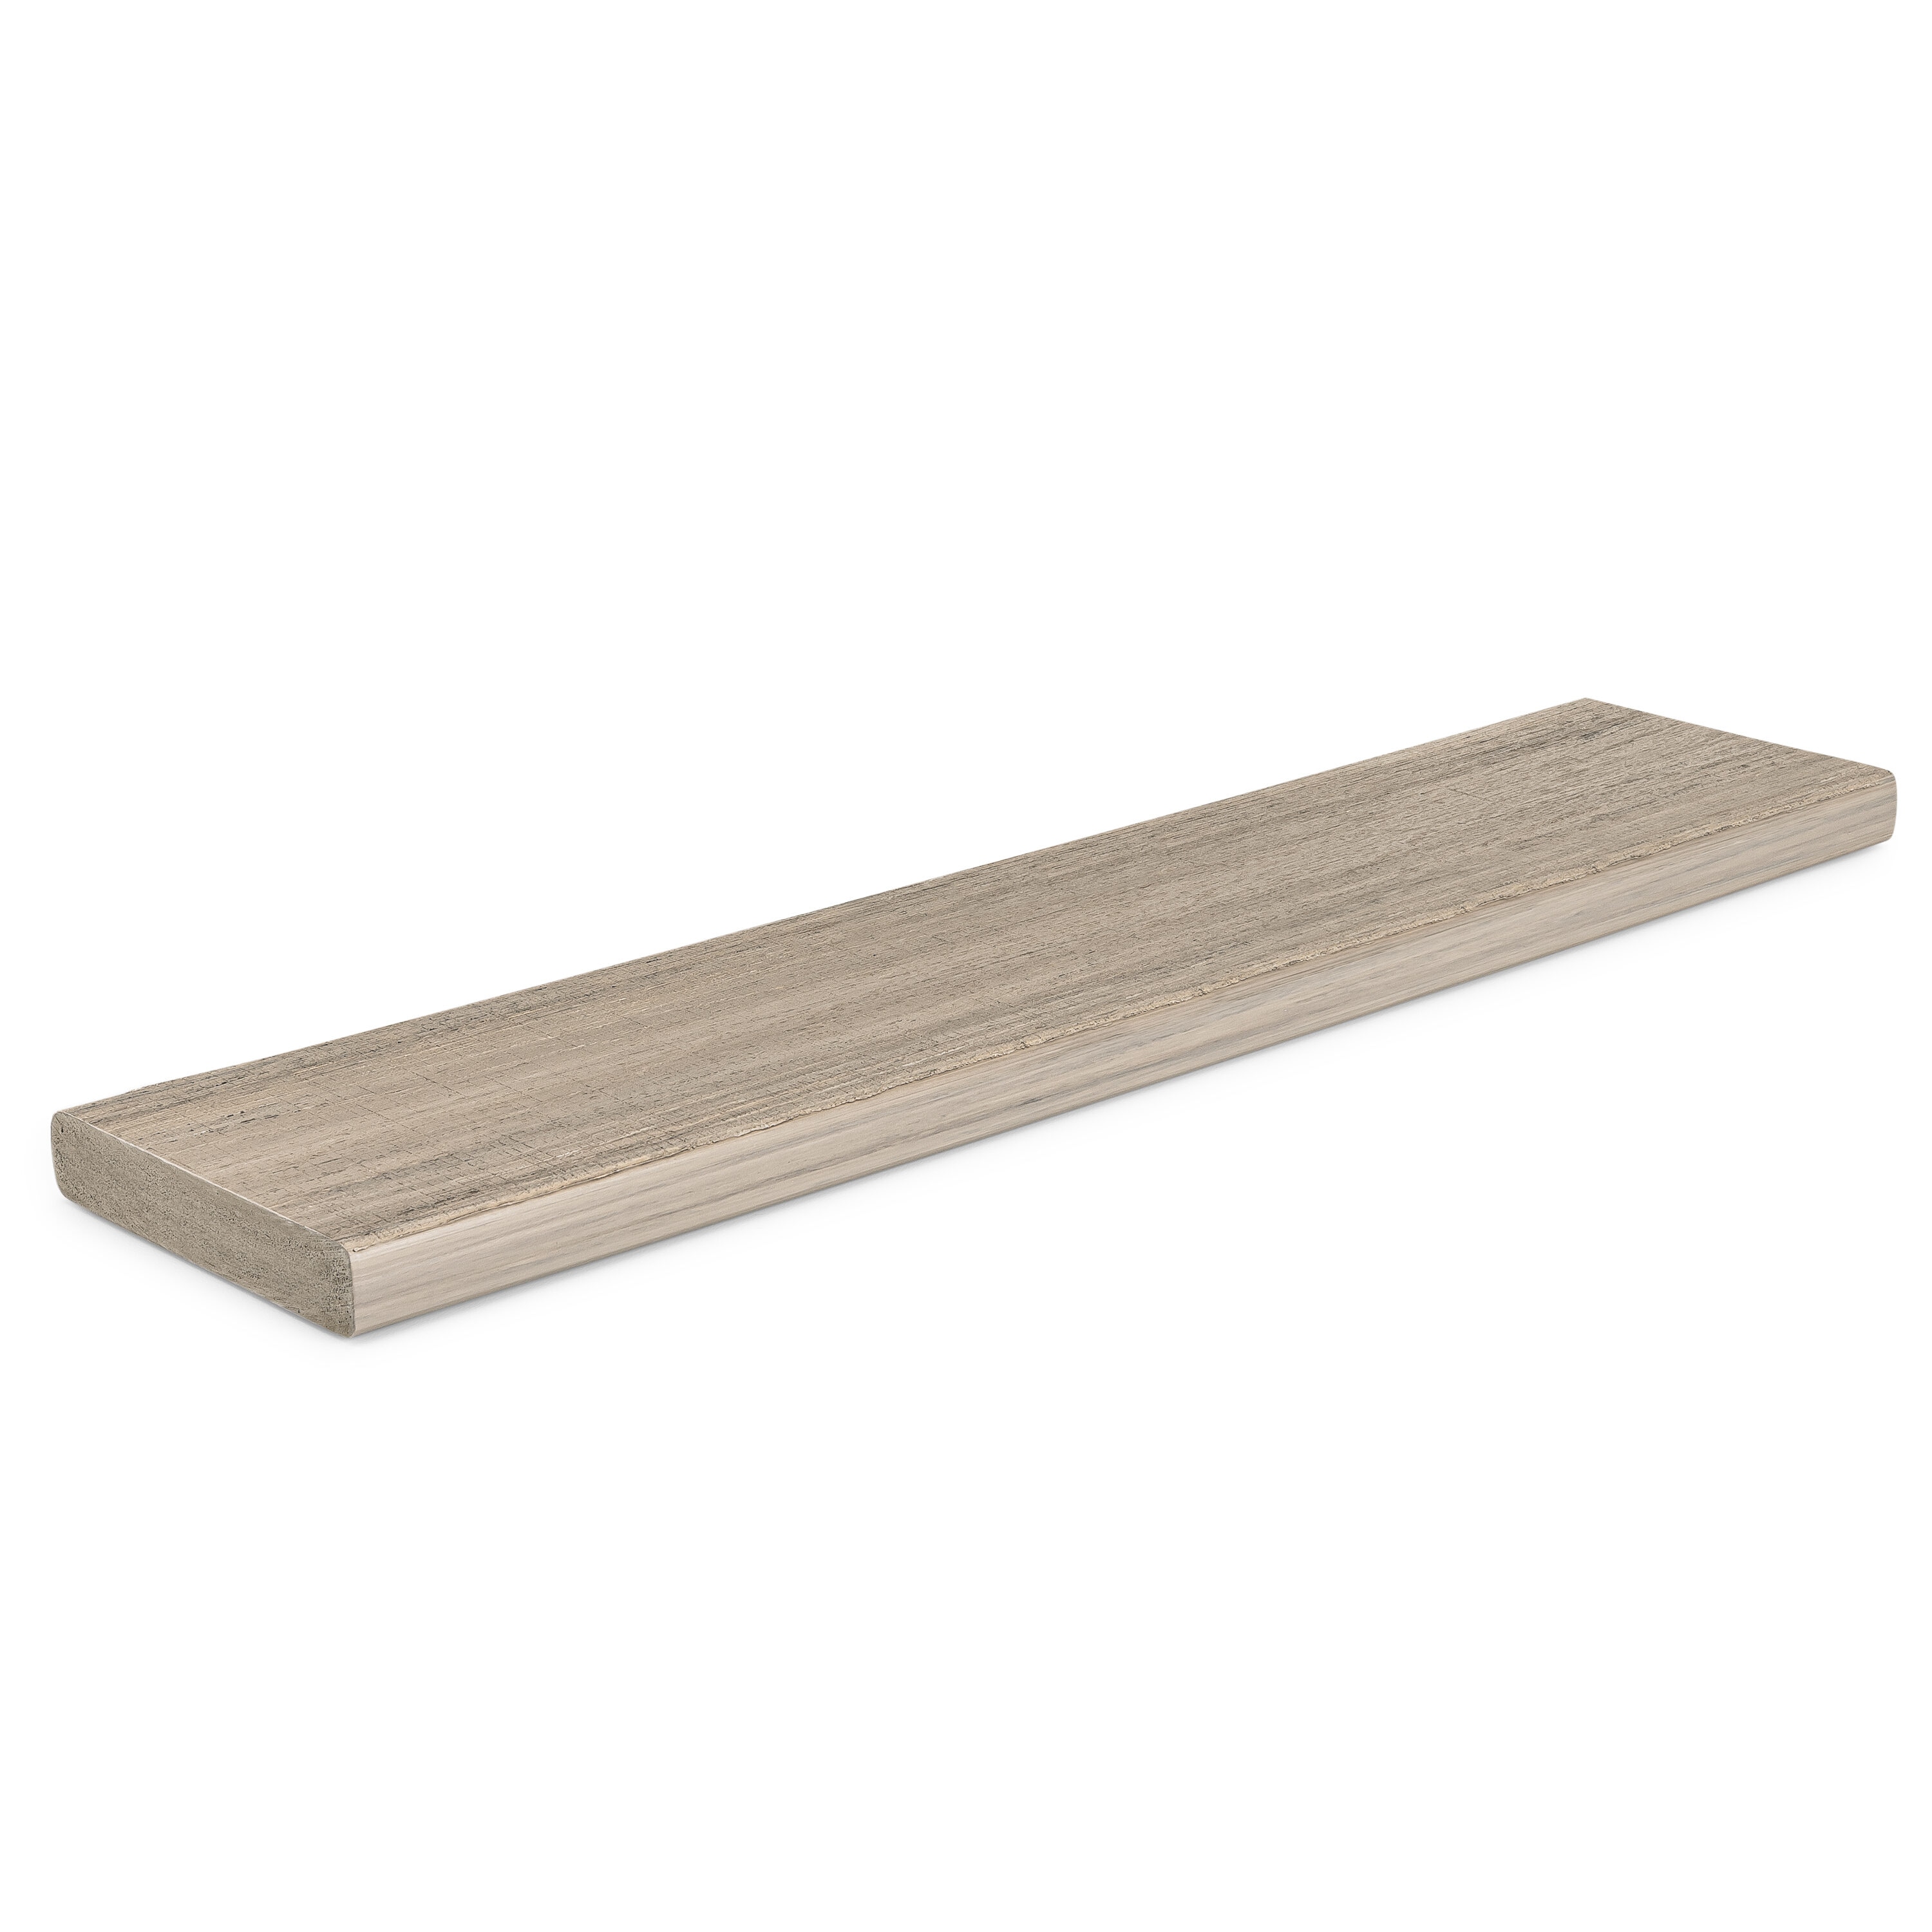 Landmark 5/4-in x 6-in x 12-ft French White Oak Grooved Composite Deck Board in Brown/Tan | - TimberTech AGB15512FW